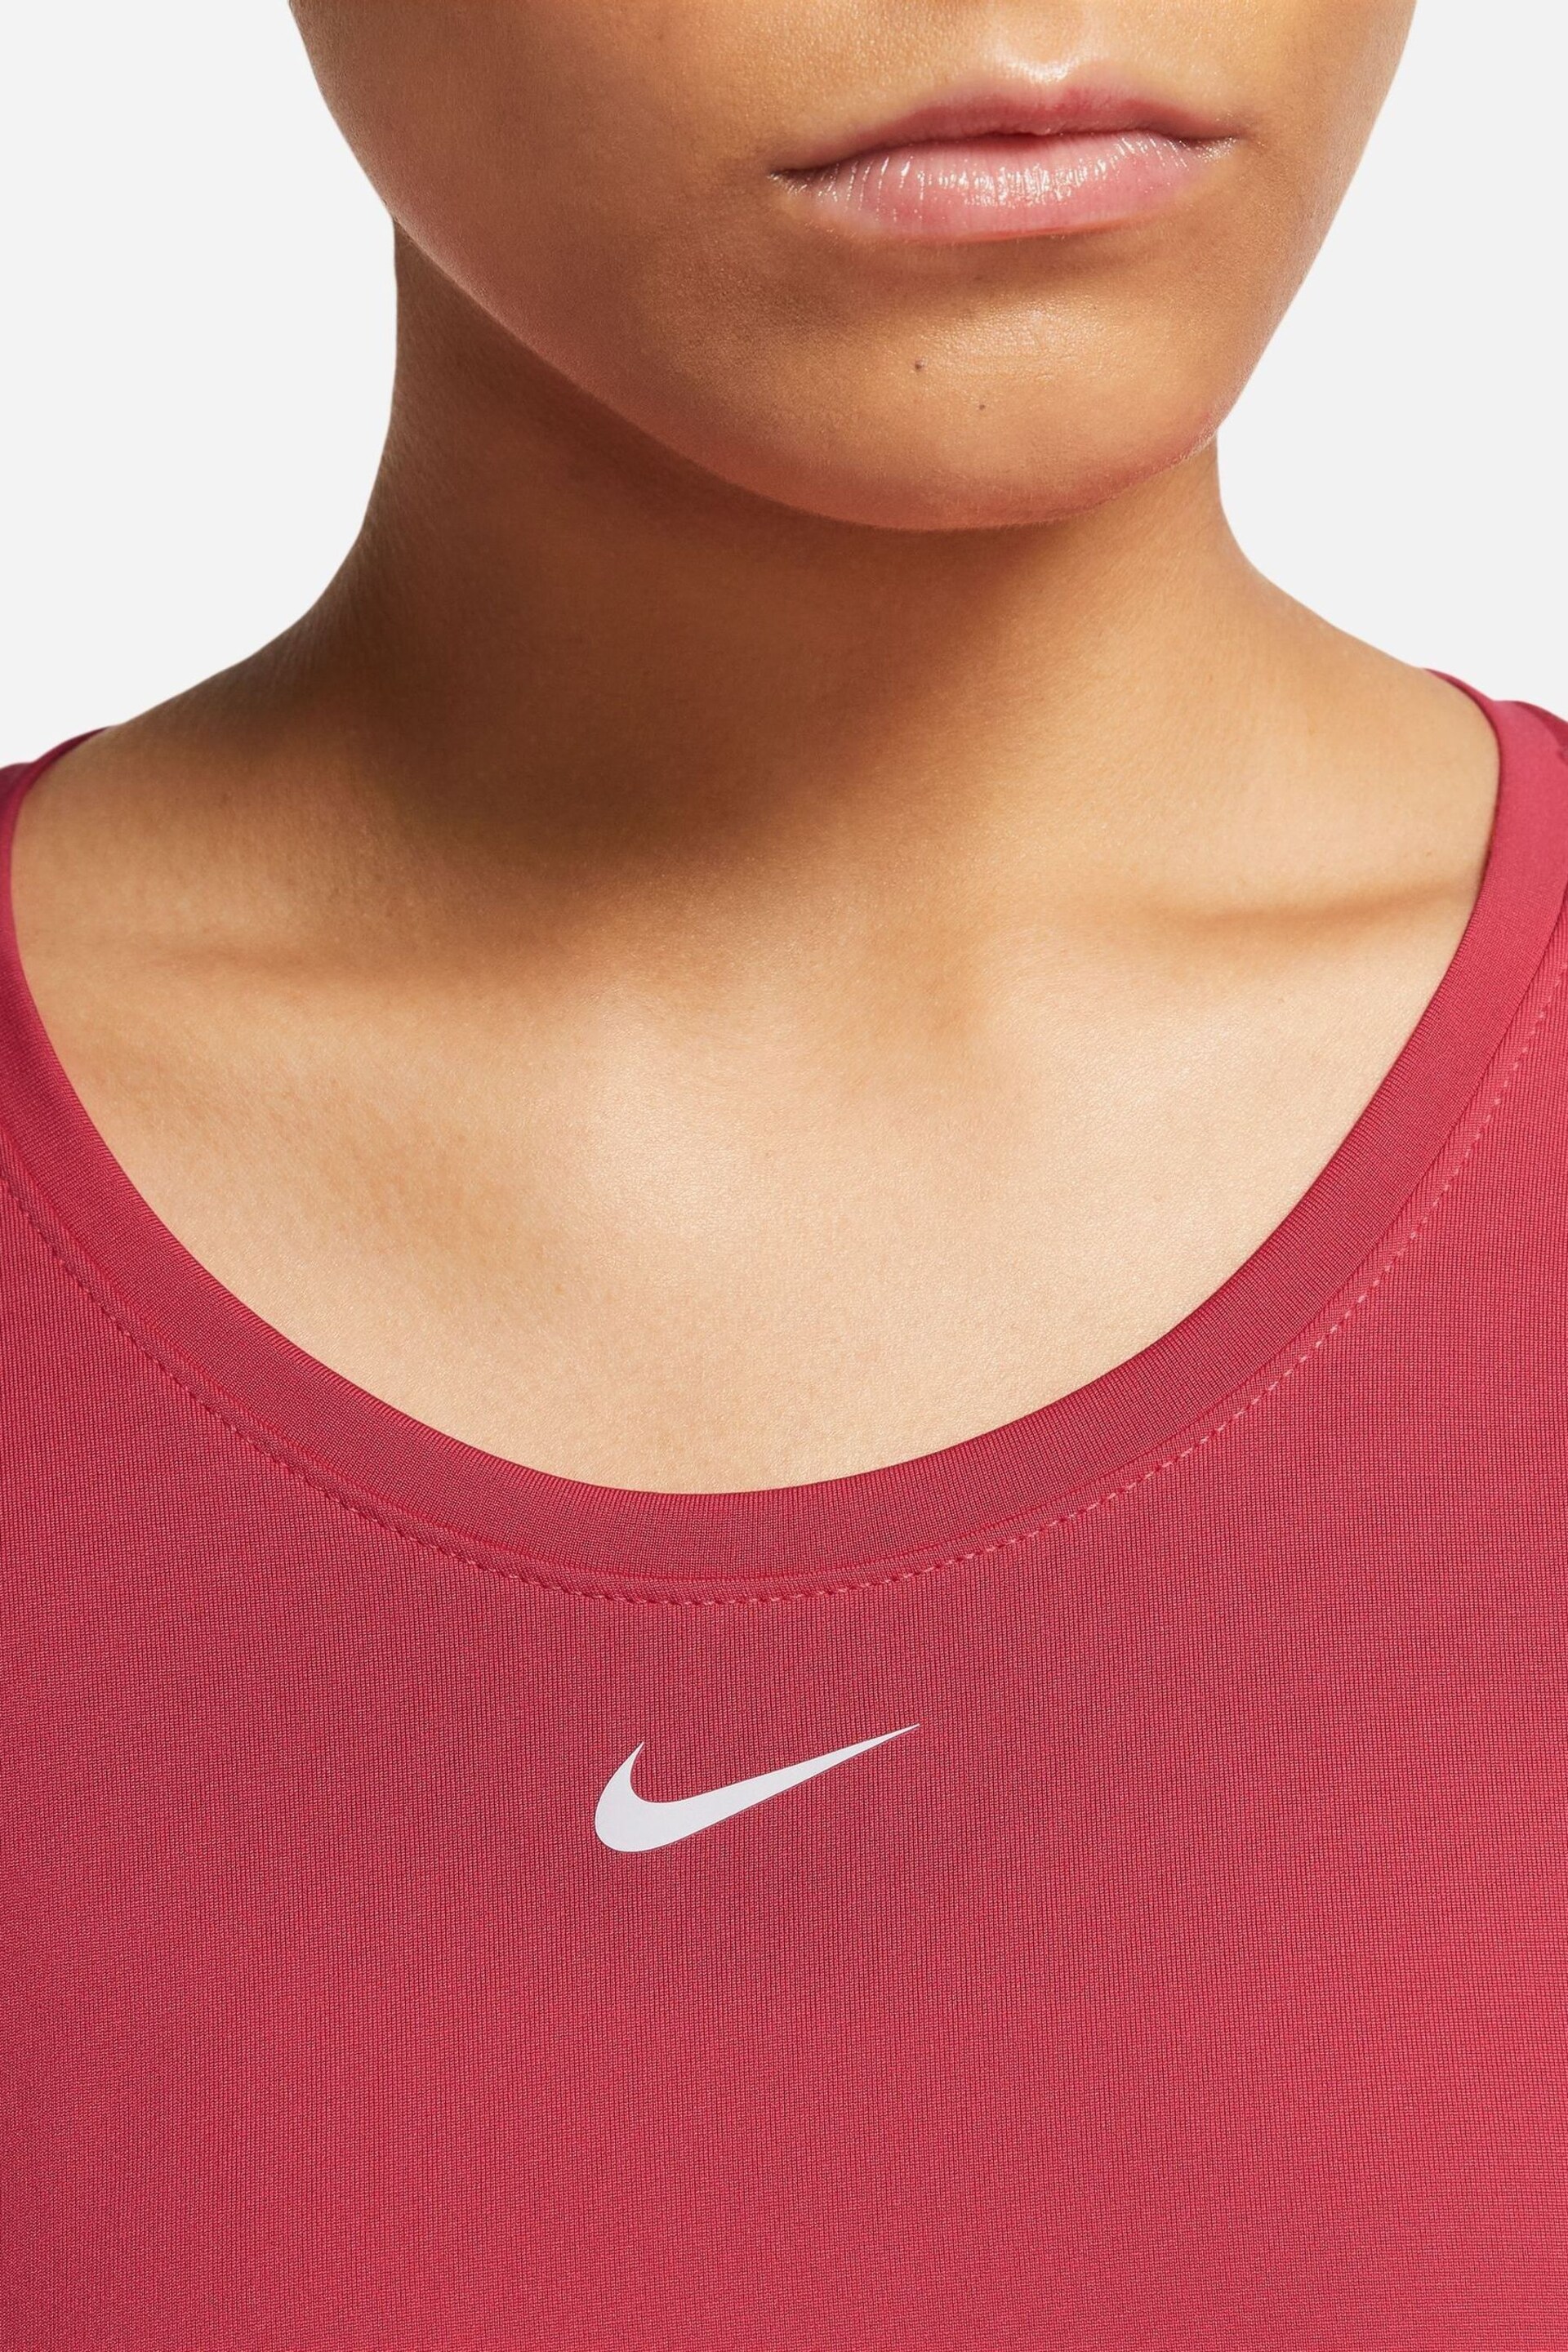 Nike Berry Red One Training Top - Image 3 of 3